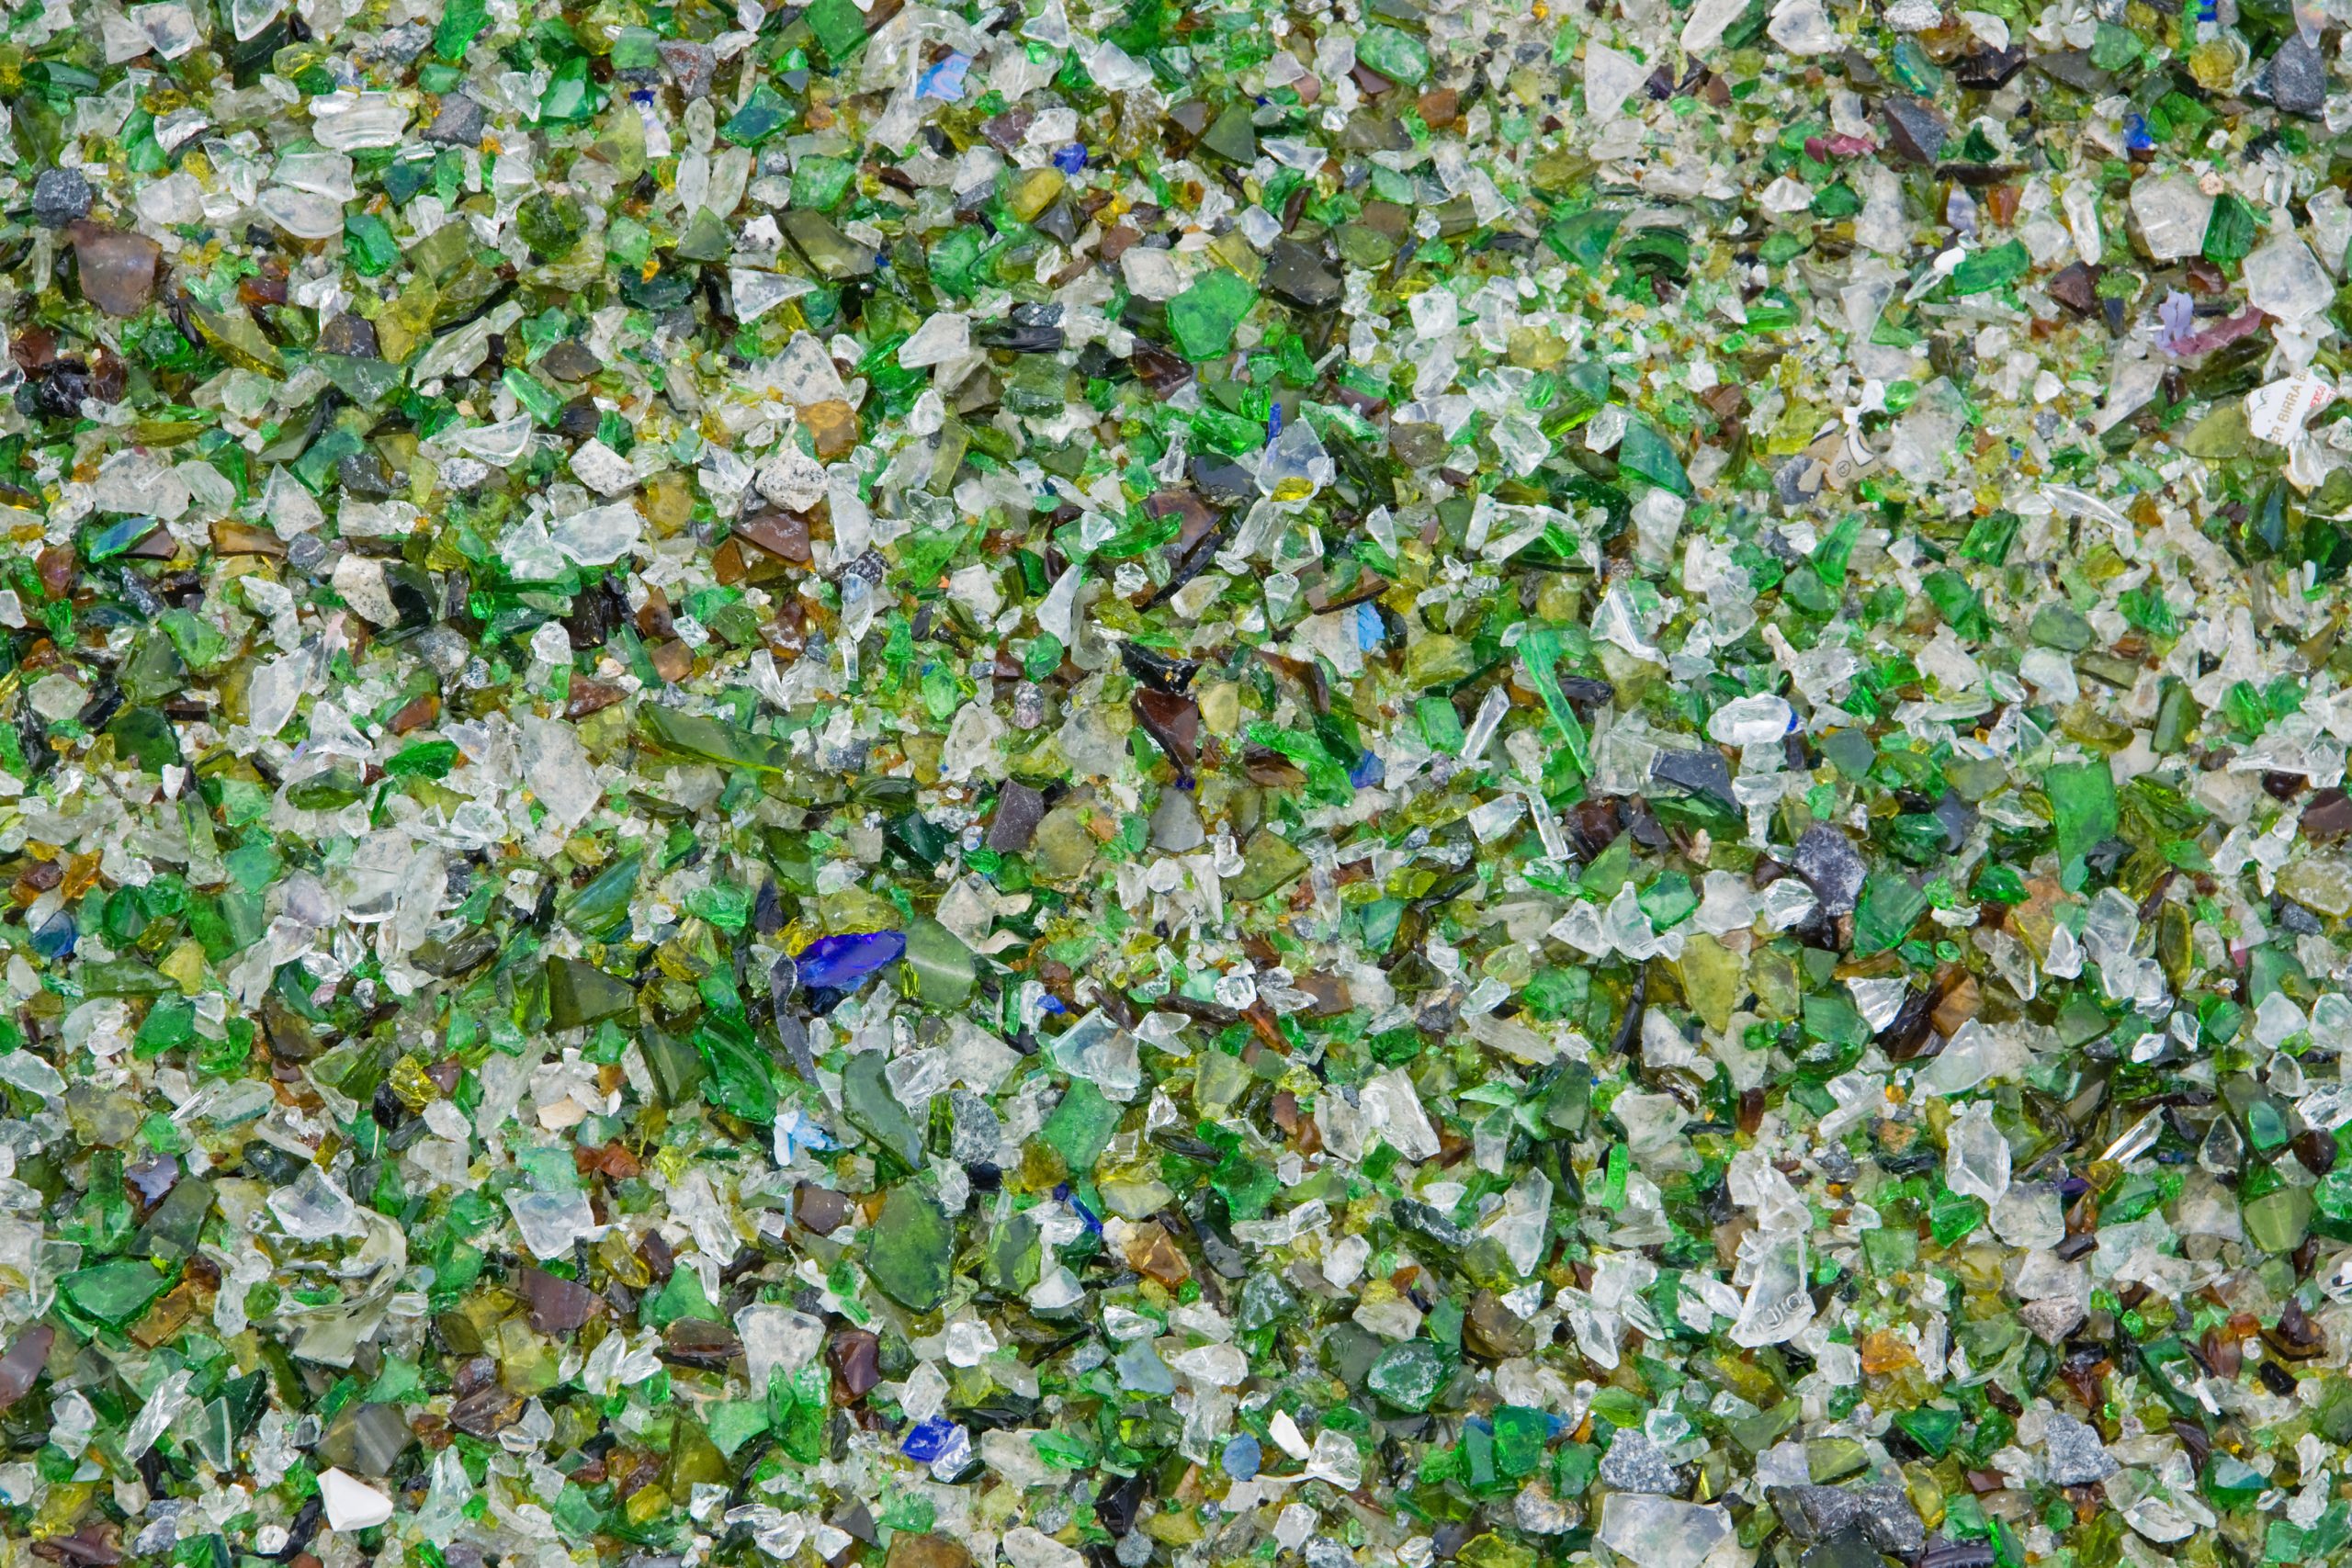 Project Investigating Recycled Materials shutterstock 55636843 1 scaled Investigating The Use Of Recycled Materials In Granular Support Layers In Western Australia 41